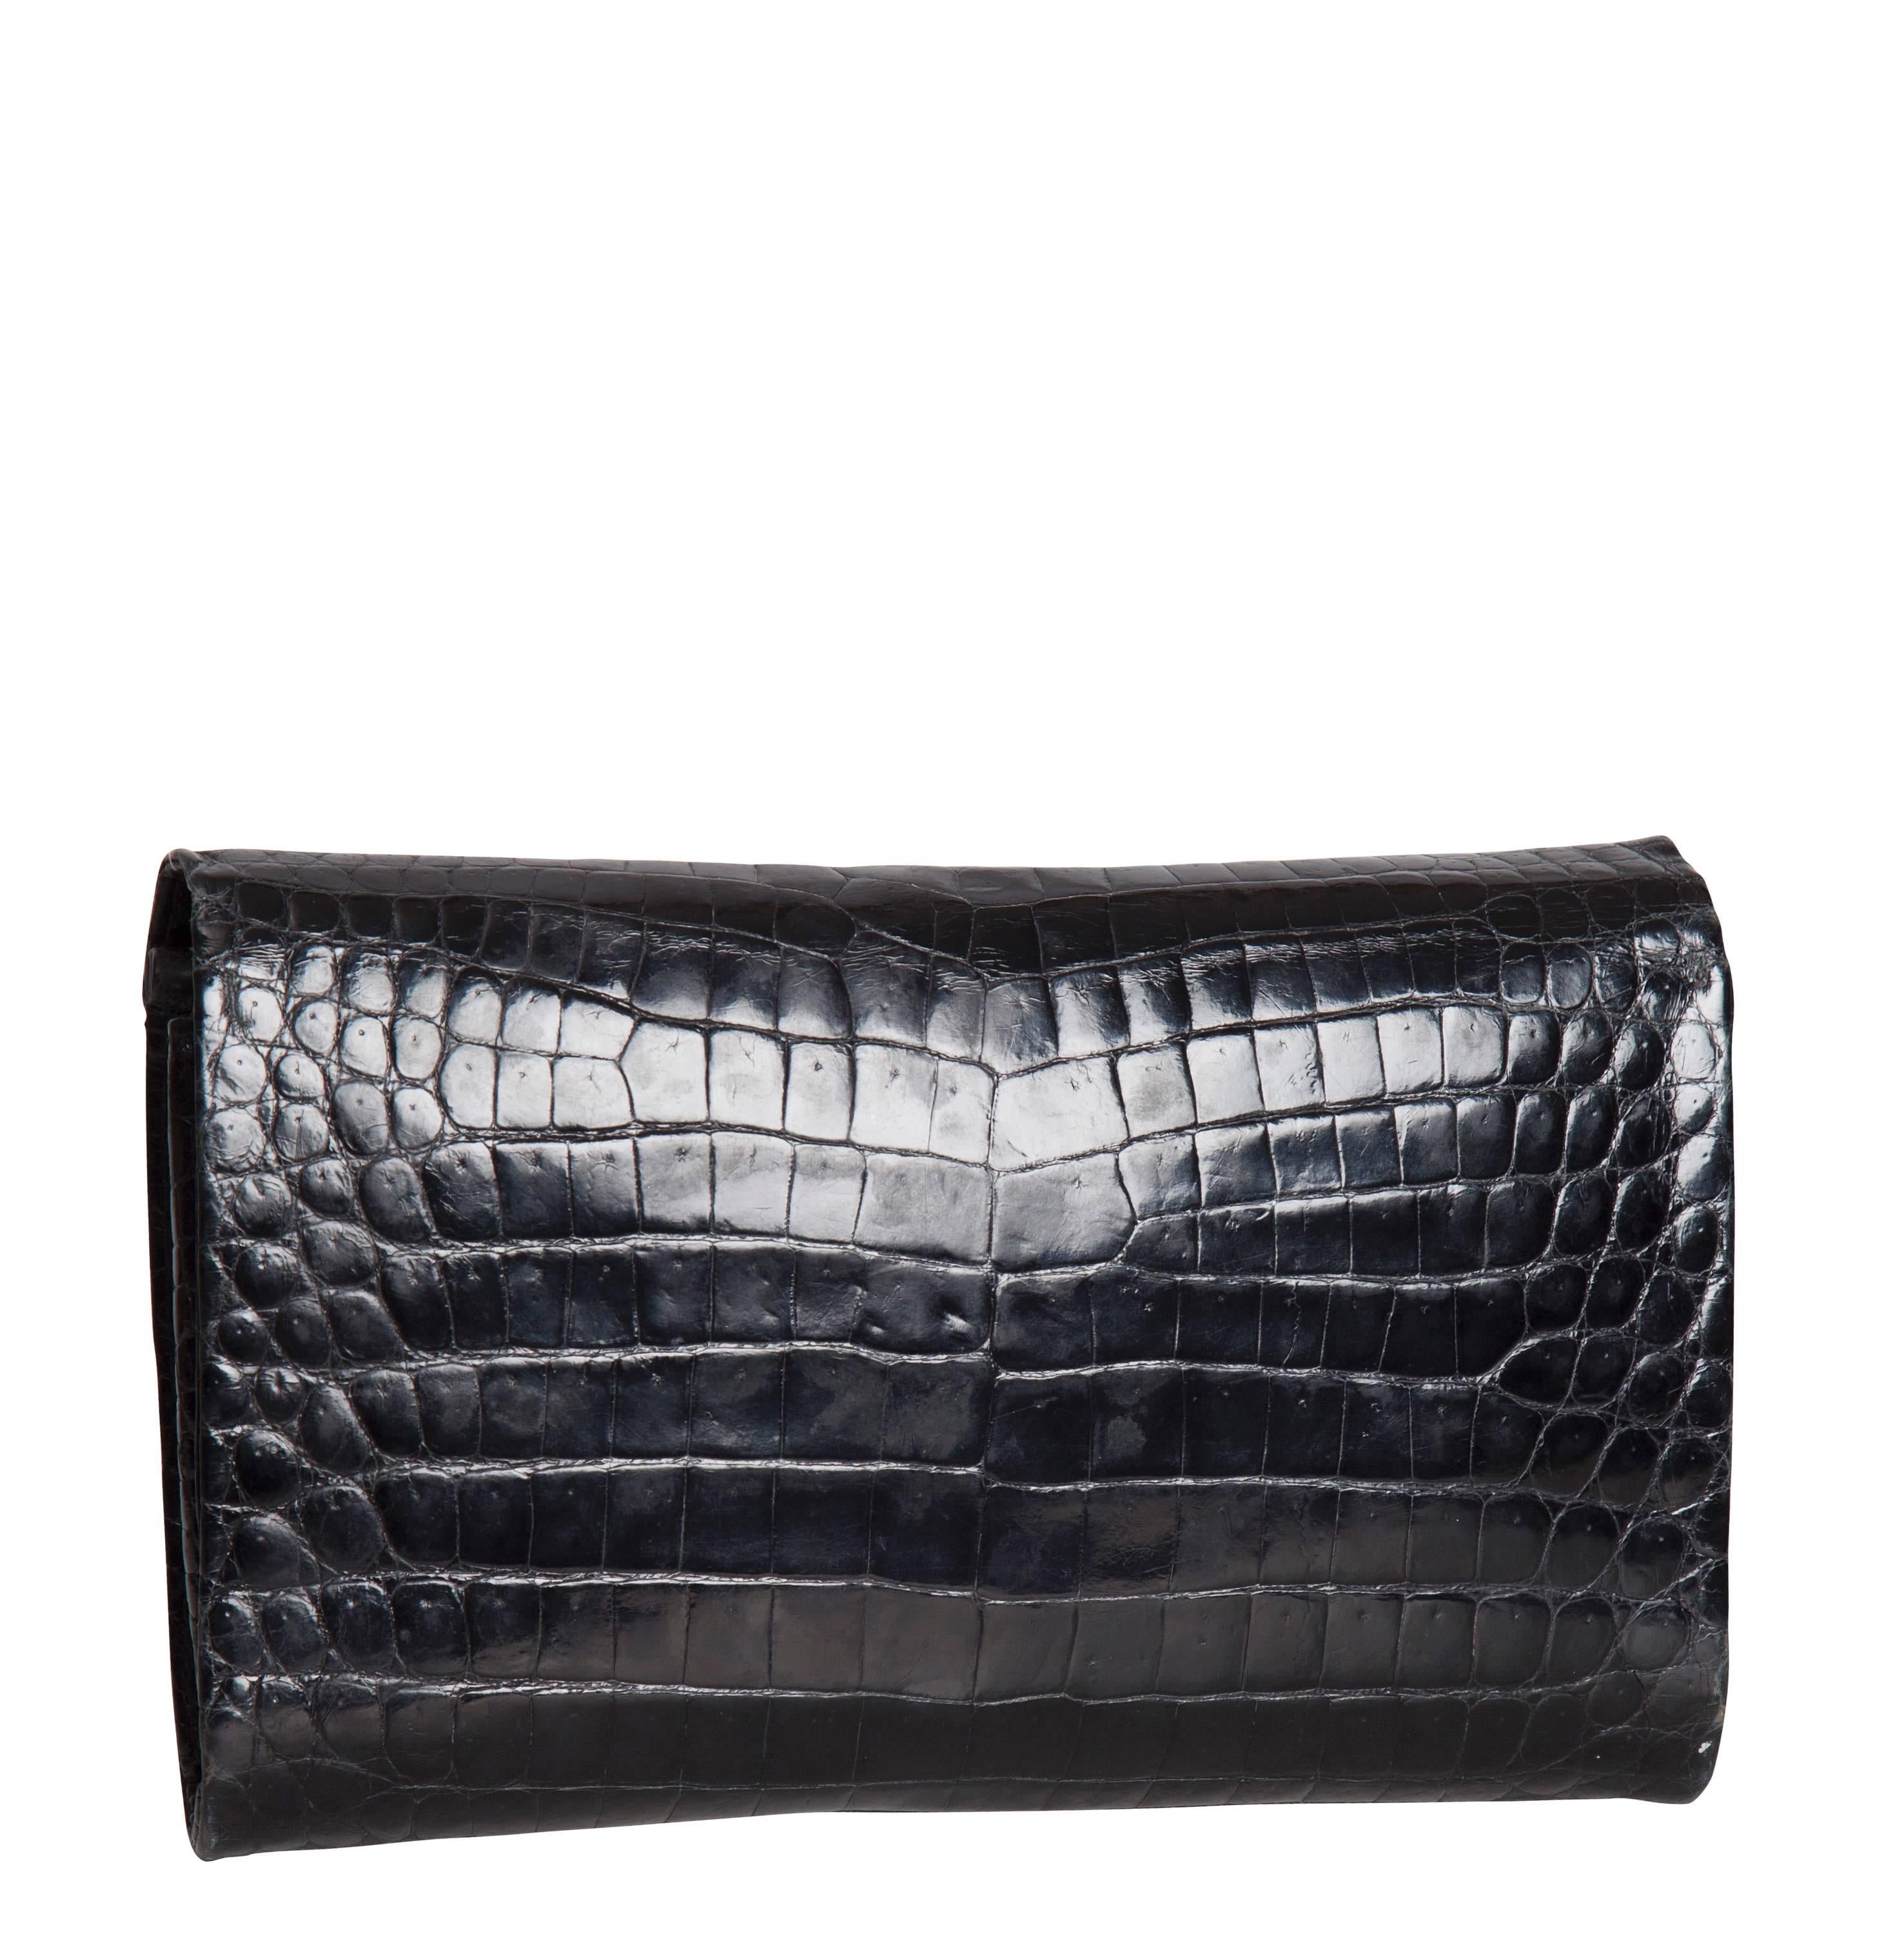 1960s Morabito Black Crocodile Skin Envelope Clutch Bag with Gold Clasp In Good Condition For Sale In London, GB